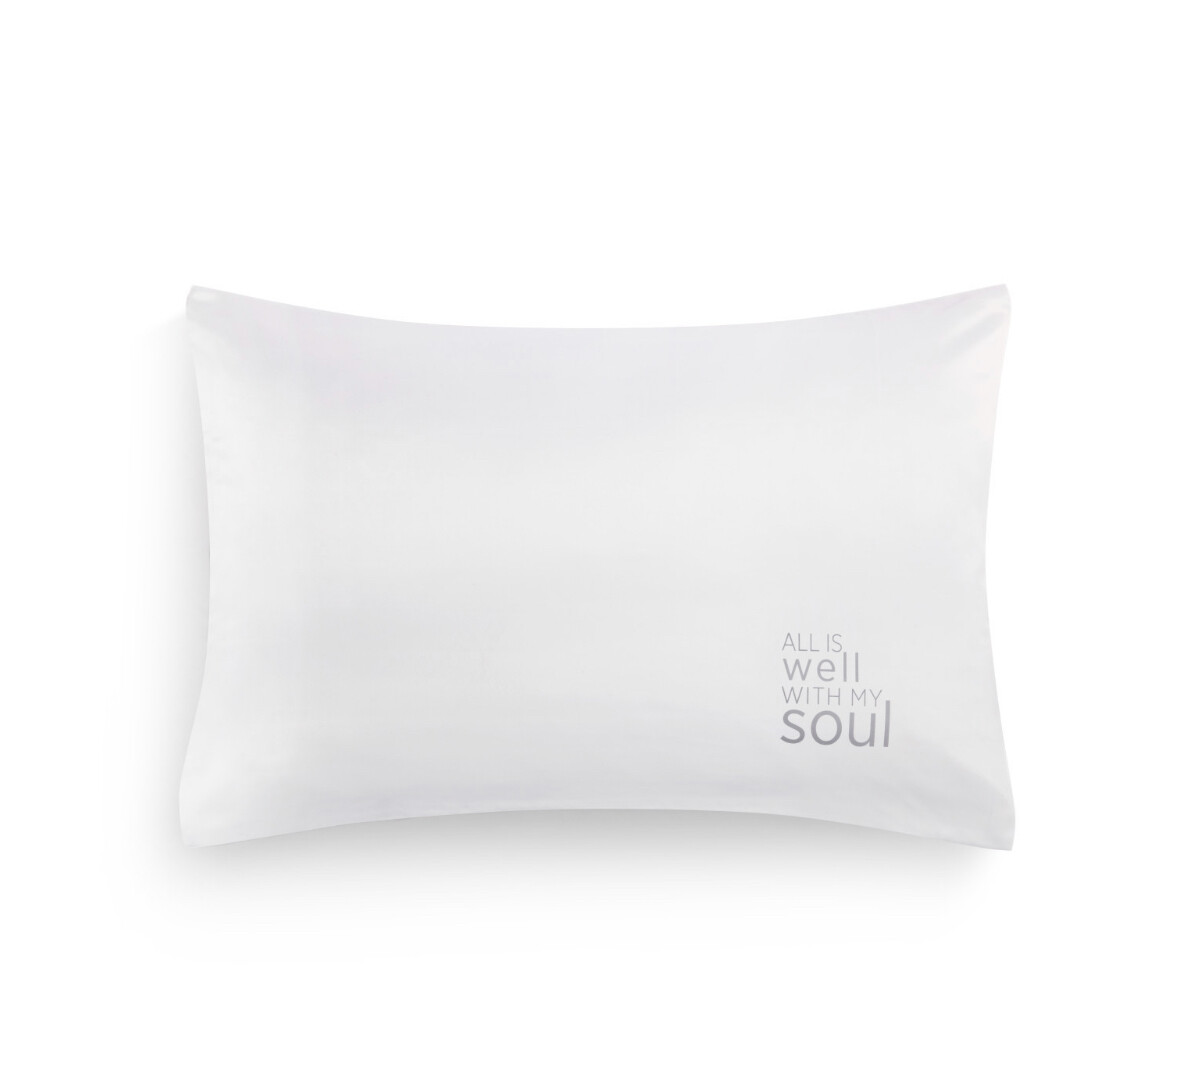 Satin Pillowcase All is Well With My Soul+